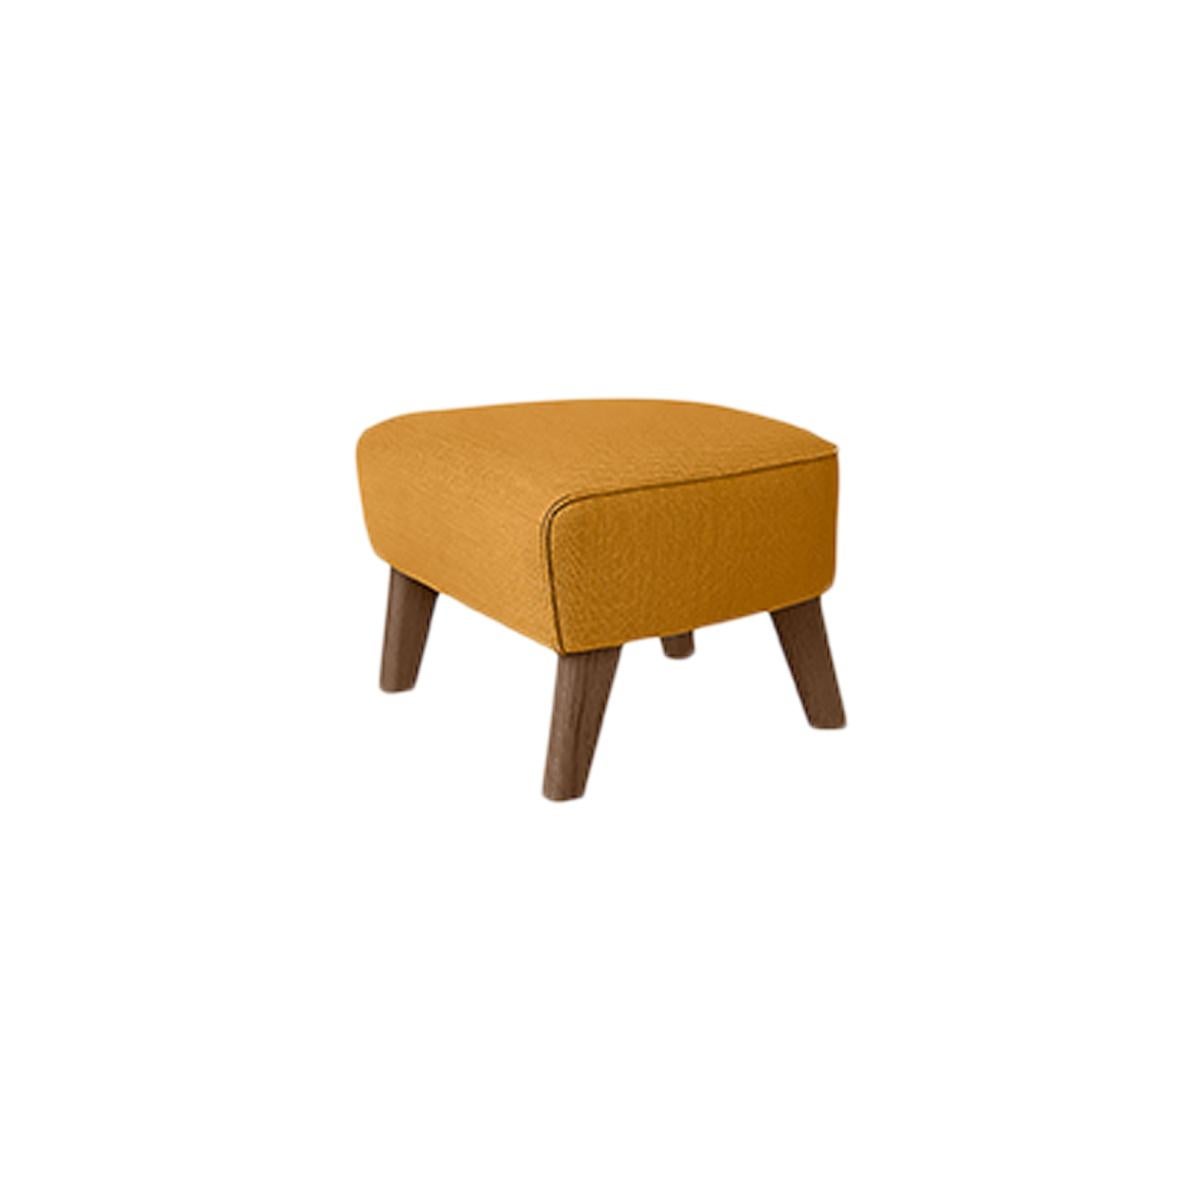 Orange and Smoked Oak Raf Simons Vidar 3 My Own Chair Footstool by Lassen
Dimensions: W 56 x D 58 x H 40 cm 
Materials: Textile
Also Available: Other colors available,

The My Own Chair Footstool has been designed in the same spirit as Flemming